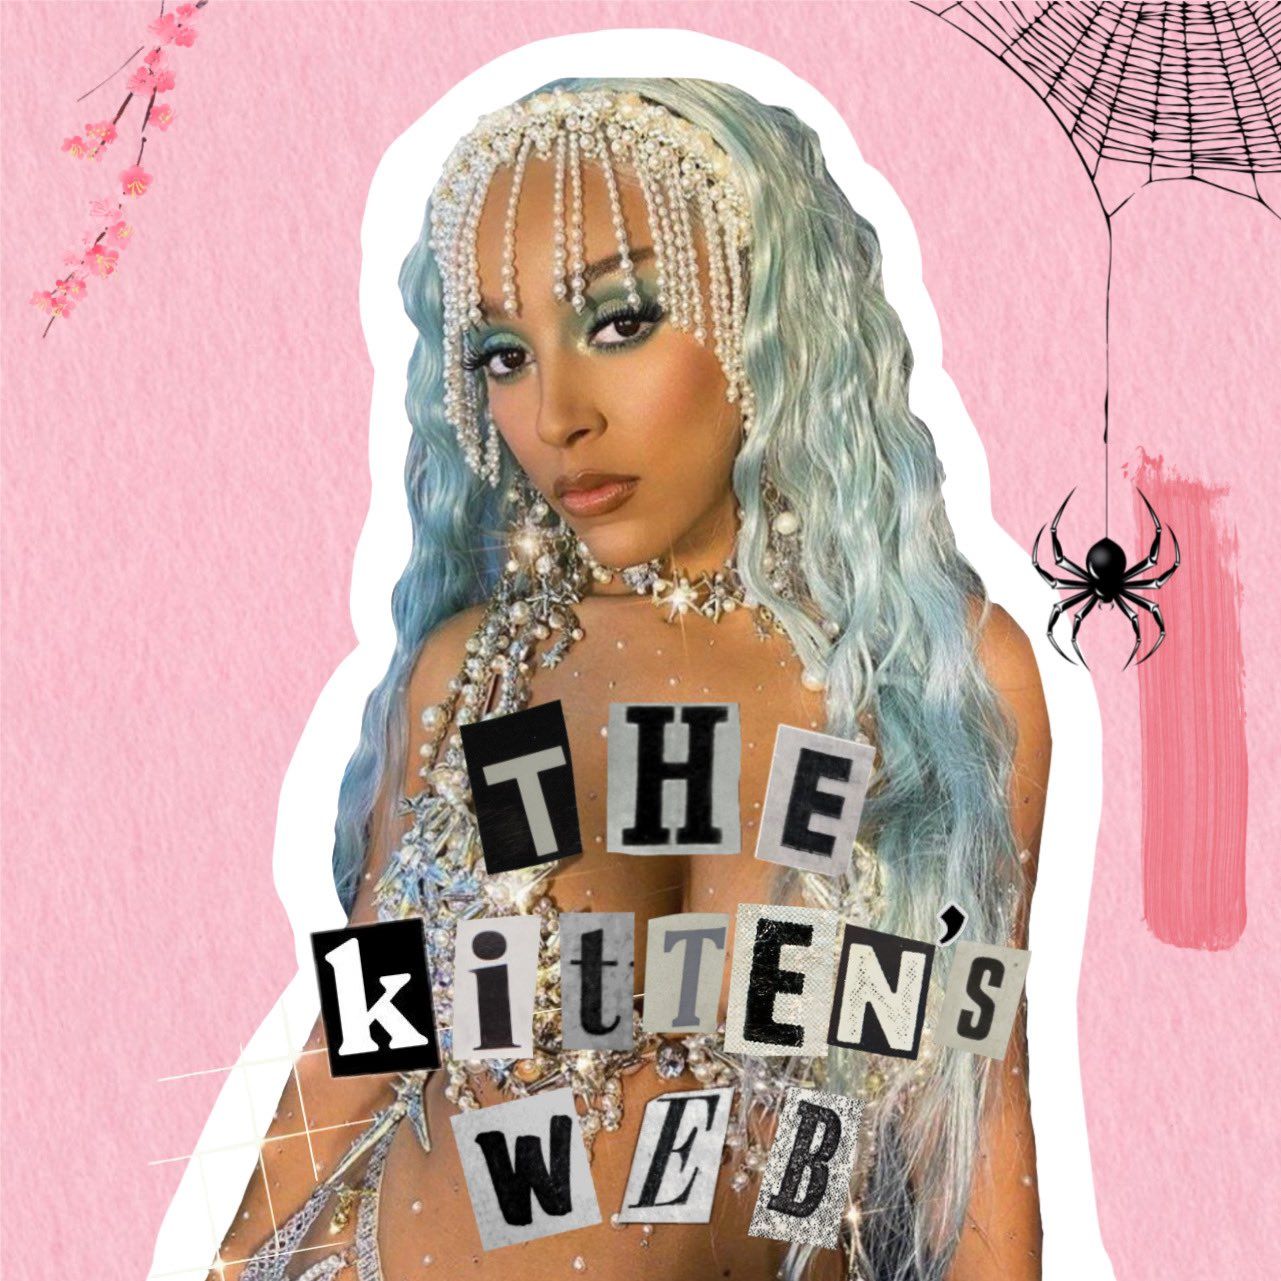 The TheUndecidedWeb is now officially a Doja Cat news account, again